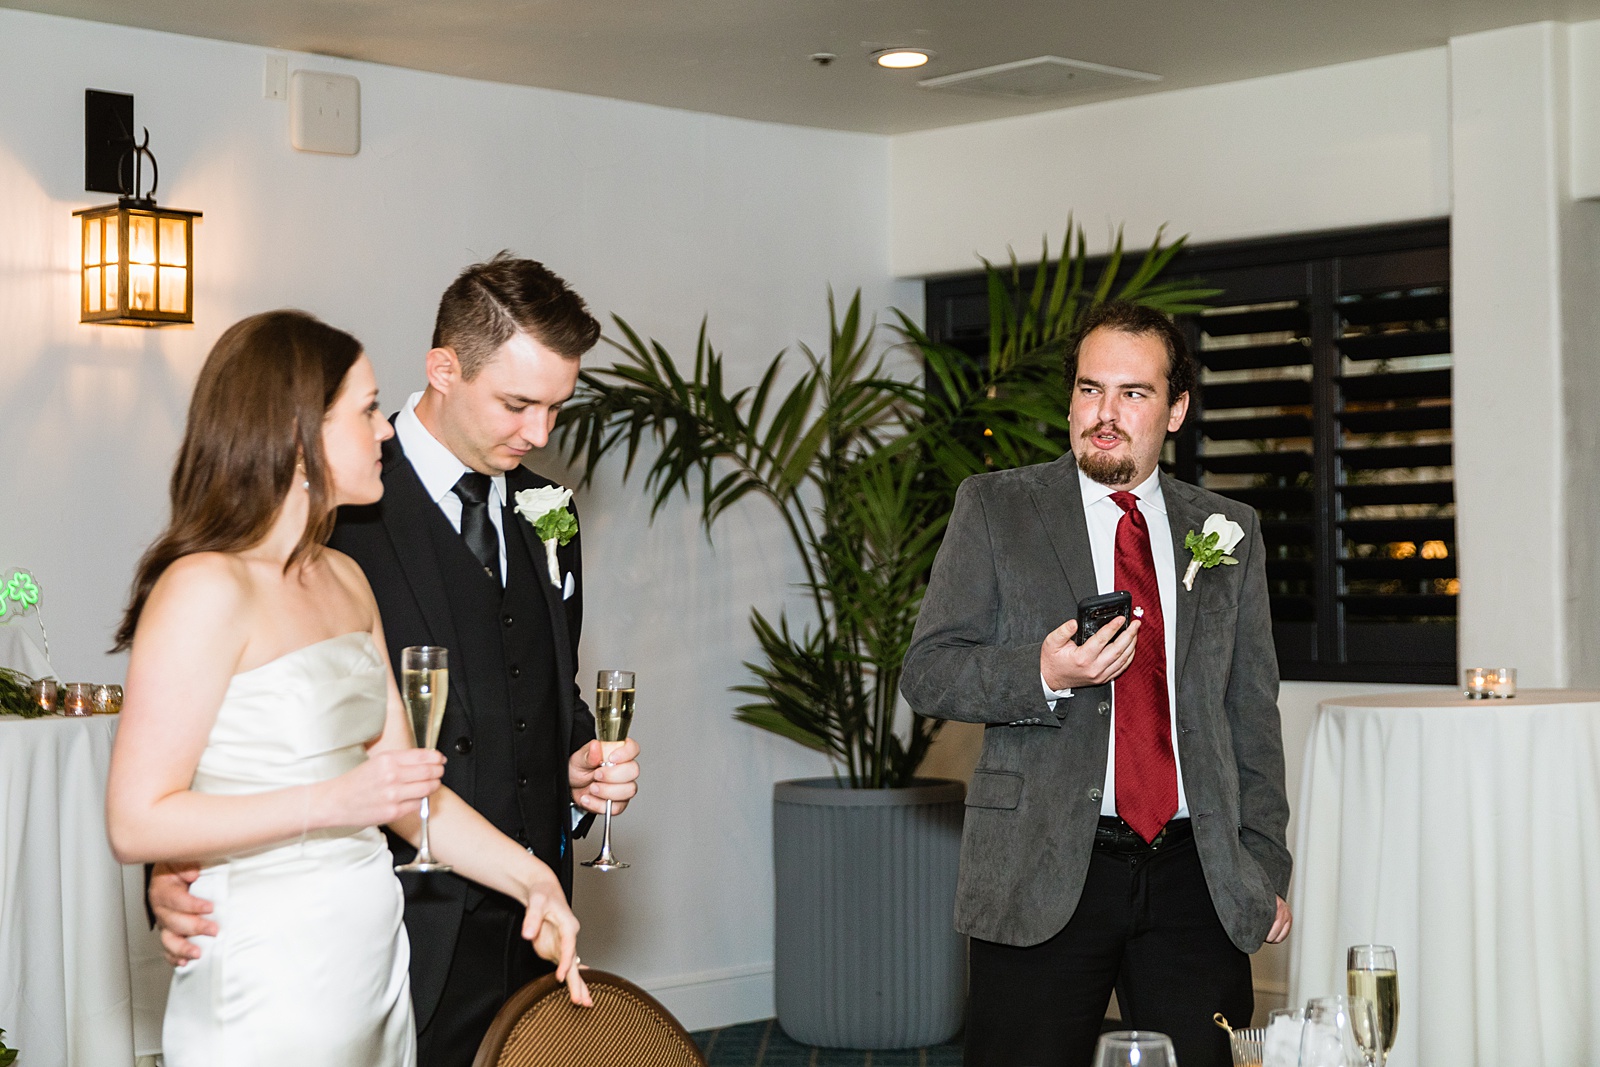 Guests make a toast at The Scott wedding reception by Scottsdale wedding photographer PMA Photography.